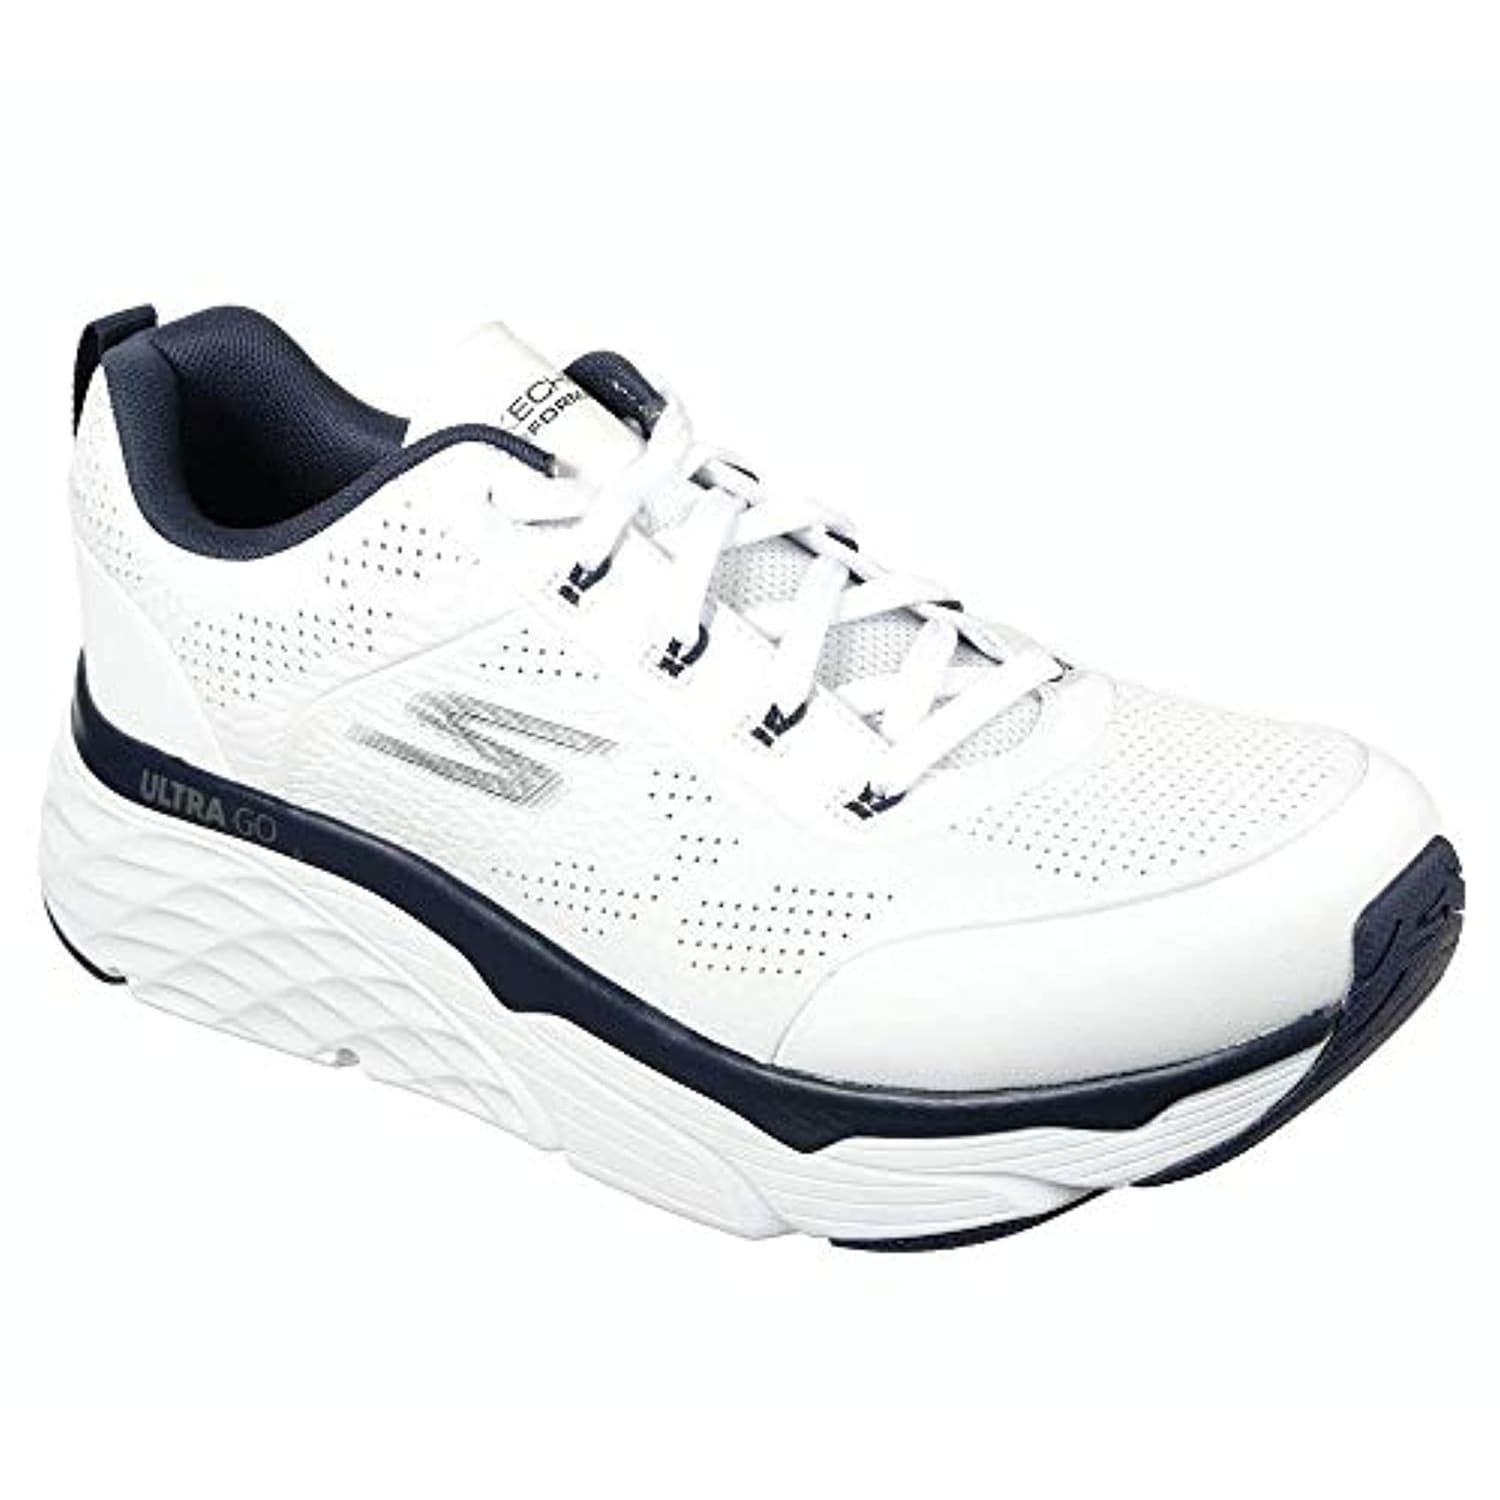 skechers white leather tennis shoes